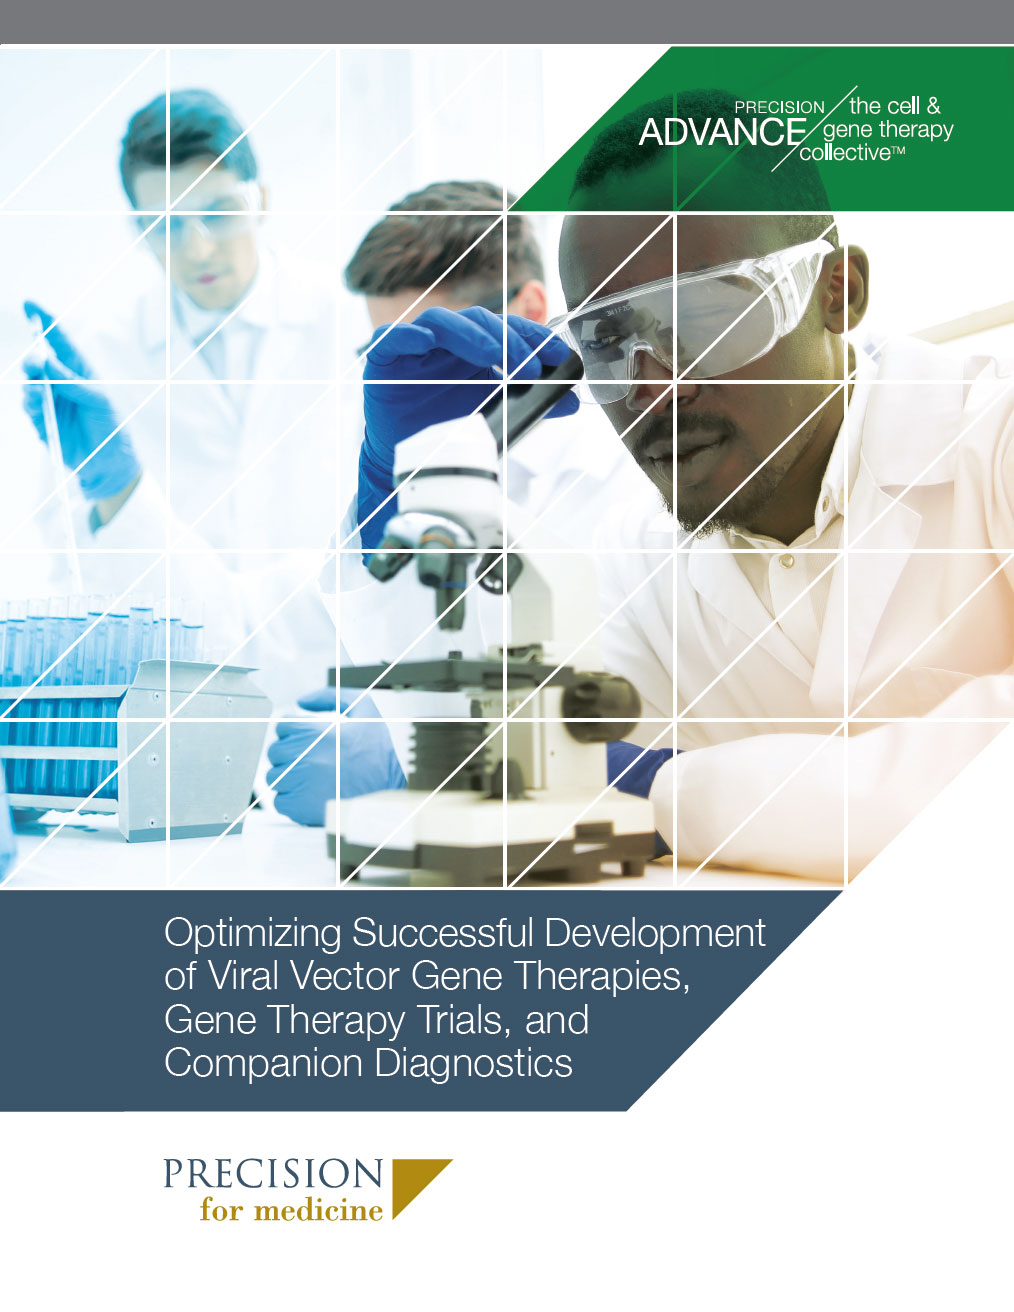 Optimizing Development of Viral Vector Gene Therapies, Trials, and Companion Diagnostics white paper thumbnail